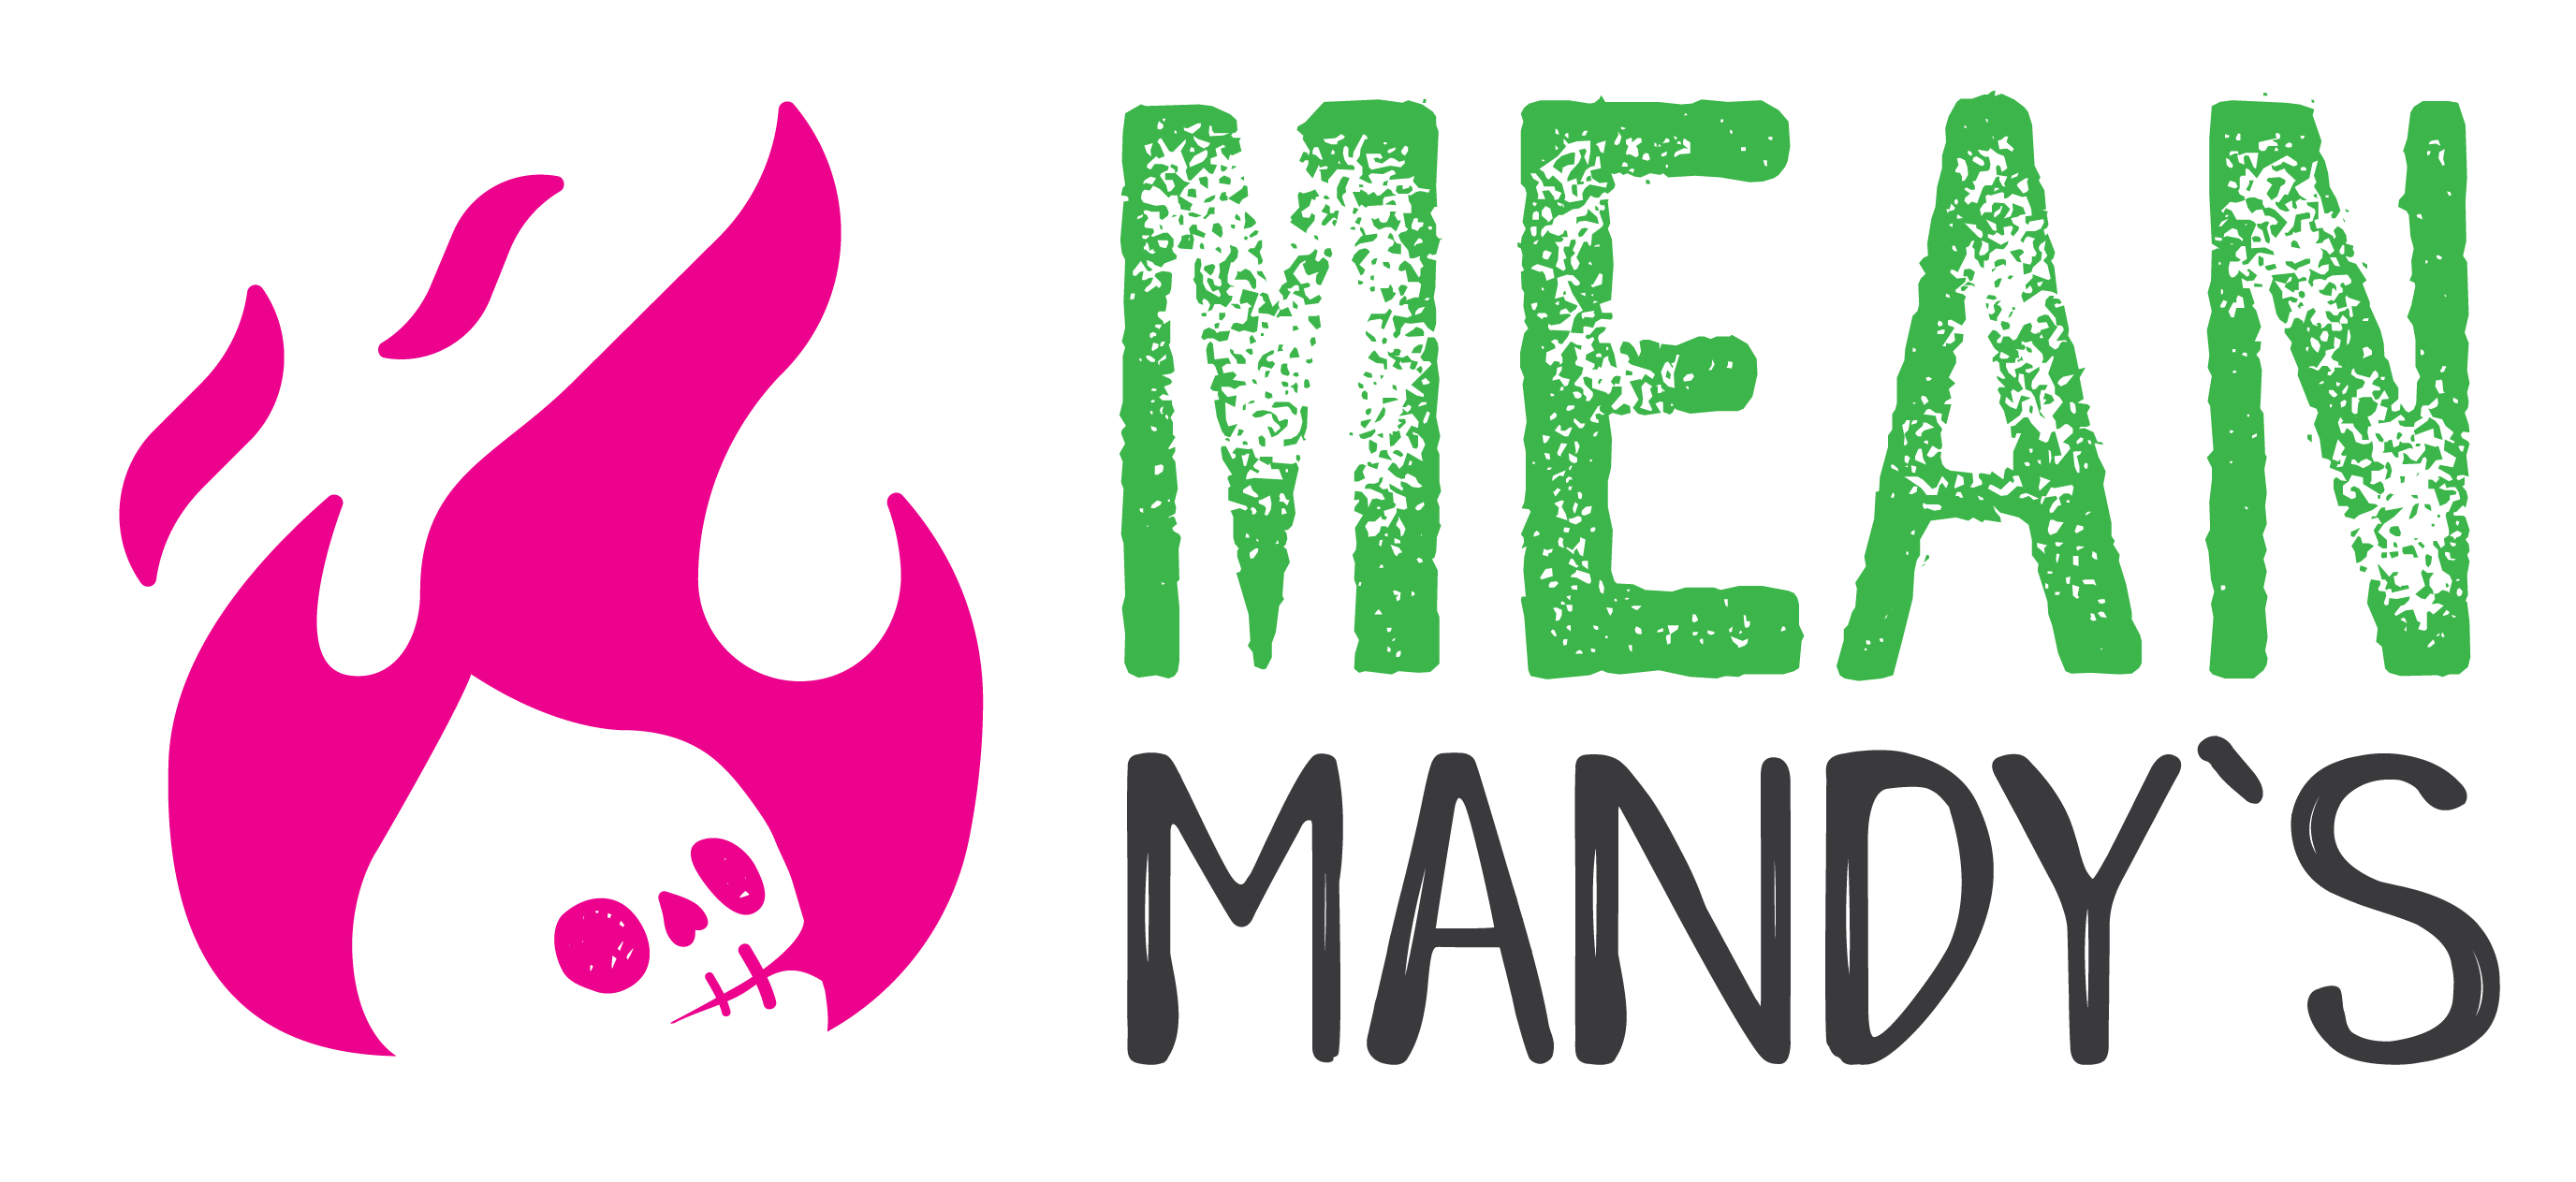 Mean Mandys Logo logo design by logo designer Neon Pig Creative for your inspiration and for the worlds largest logo competition